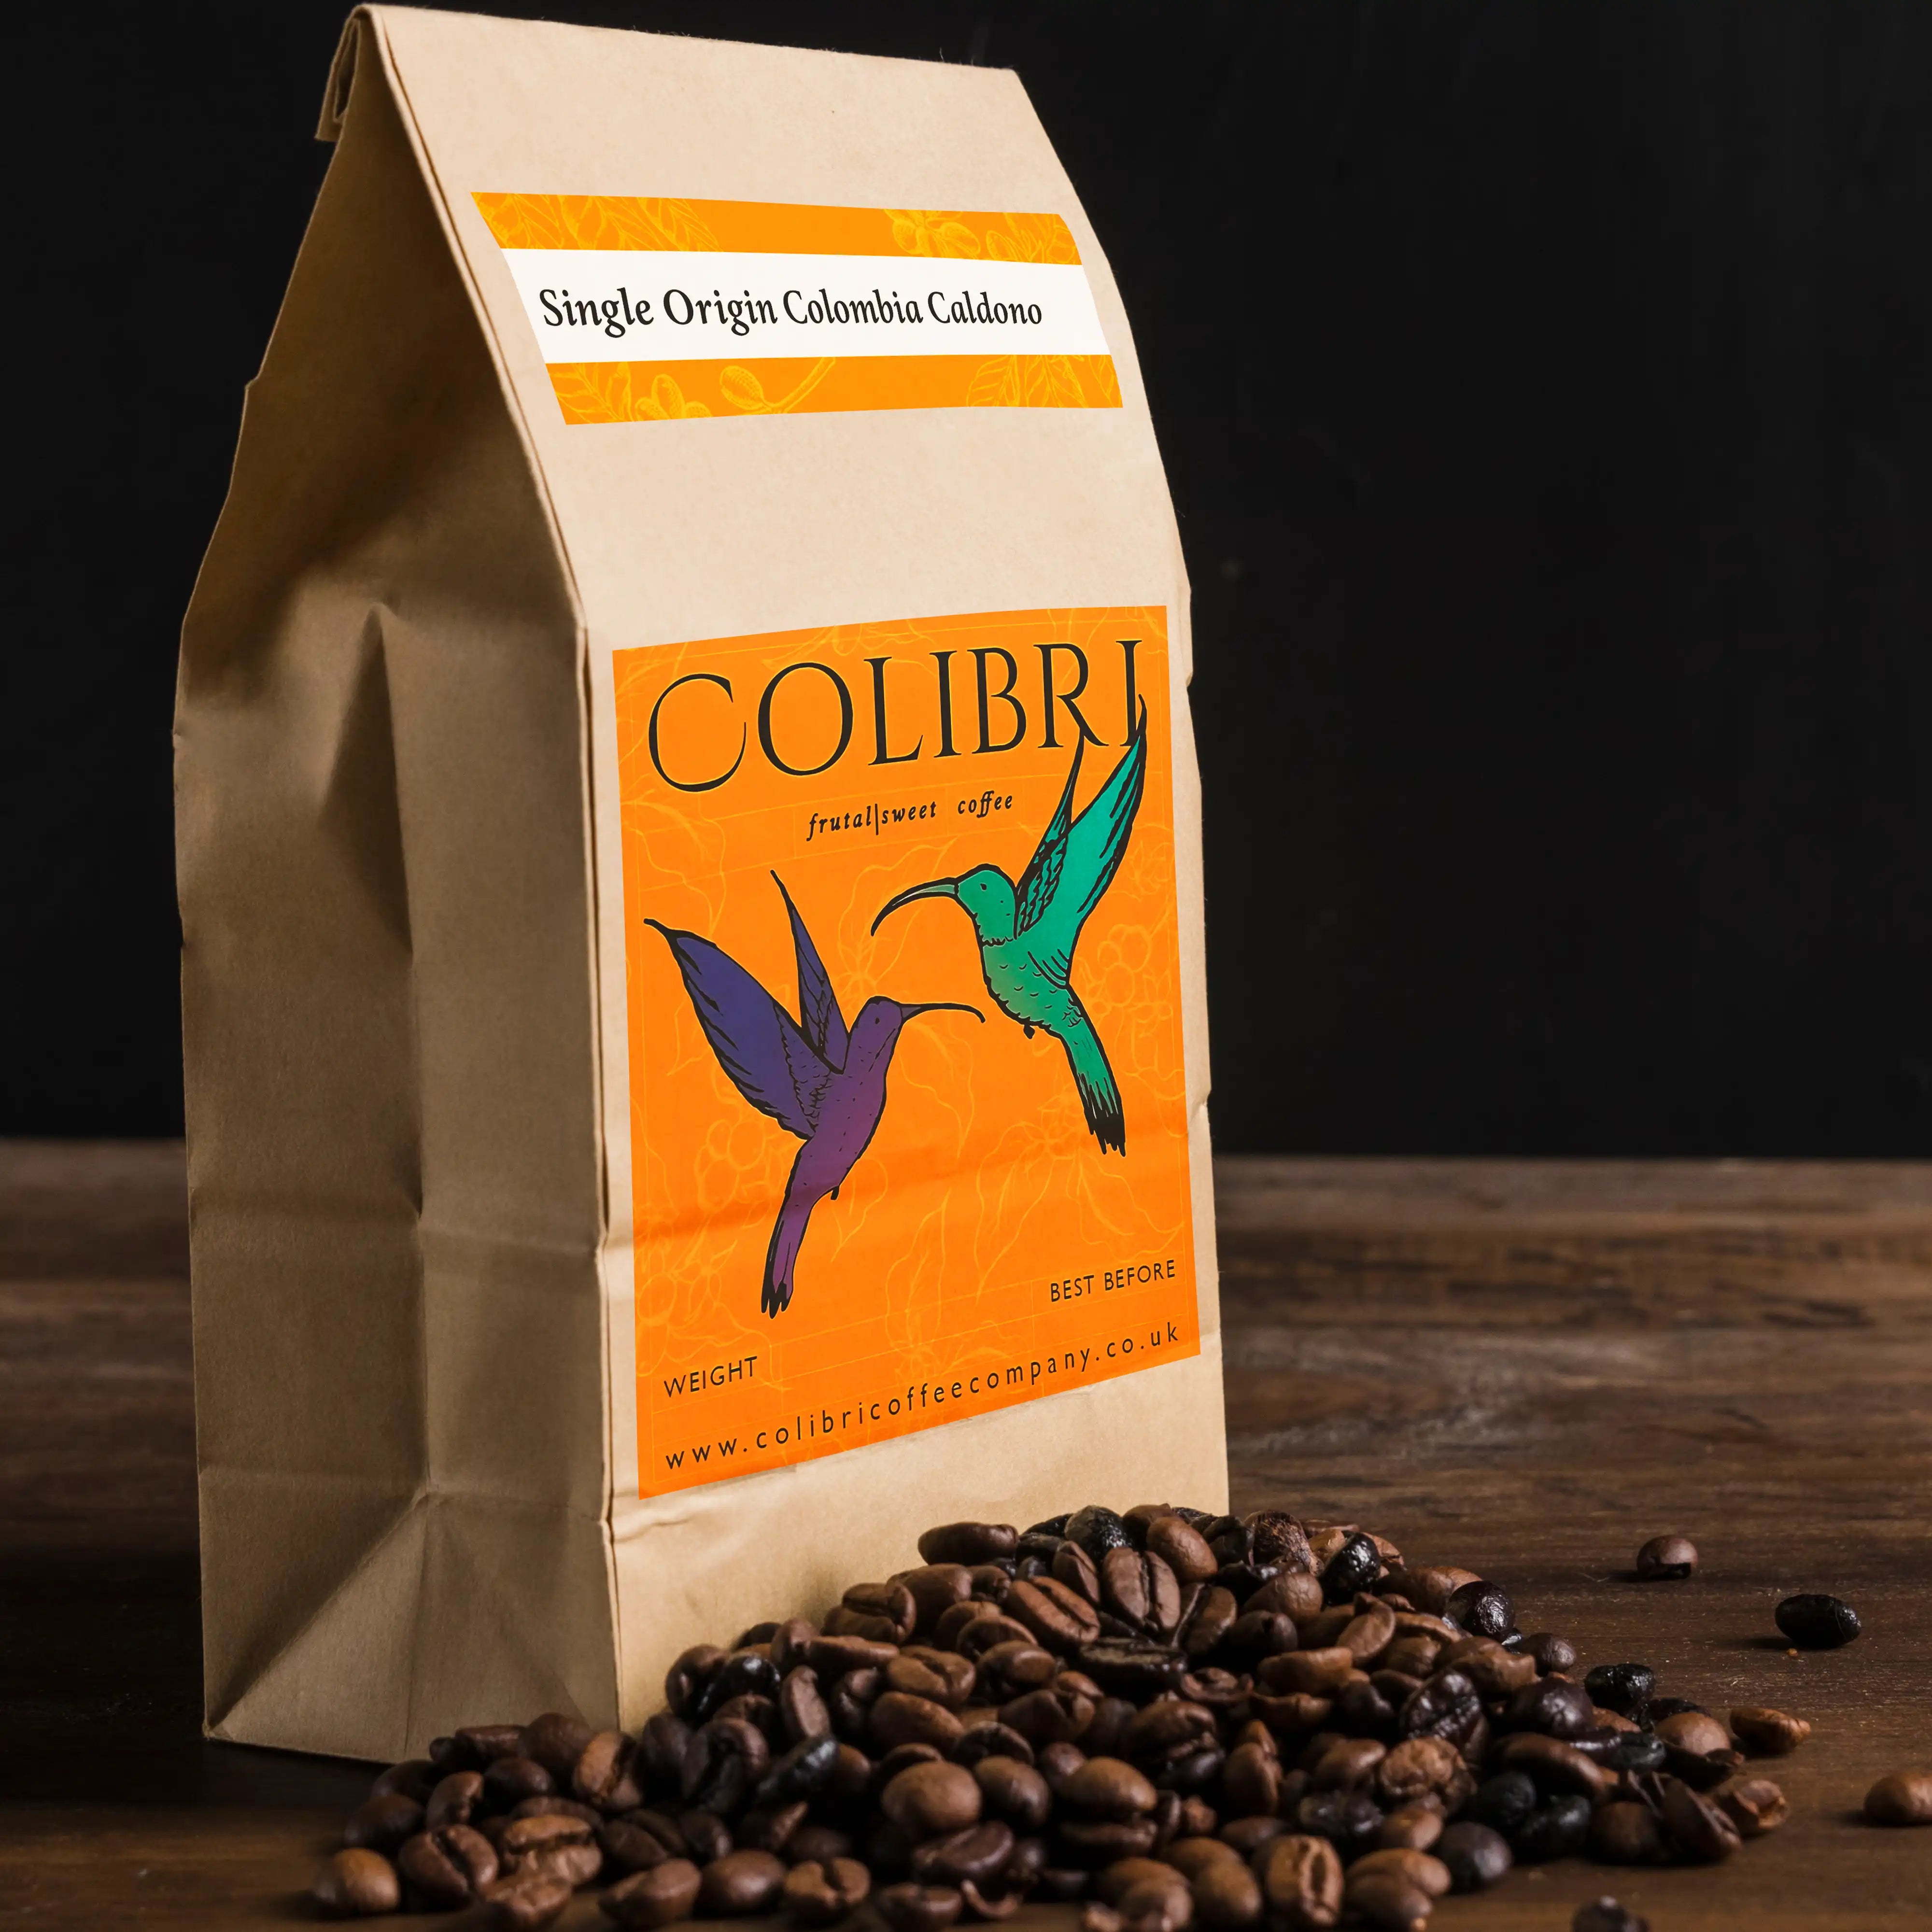 Best Coffee Beans for Cold Brew - Blends and Single Origin